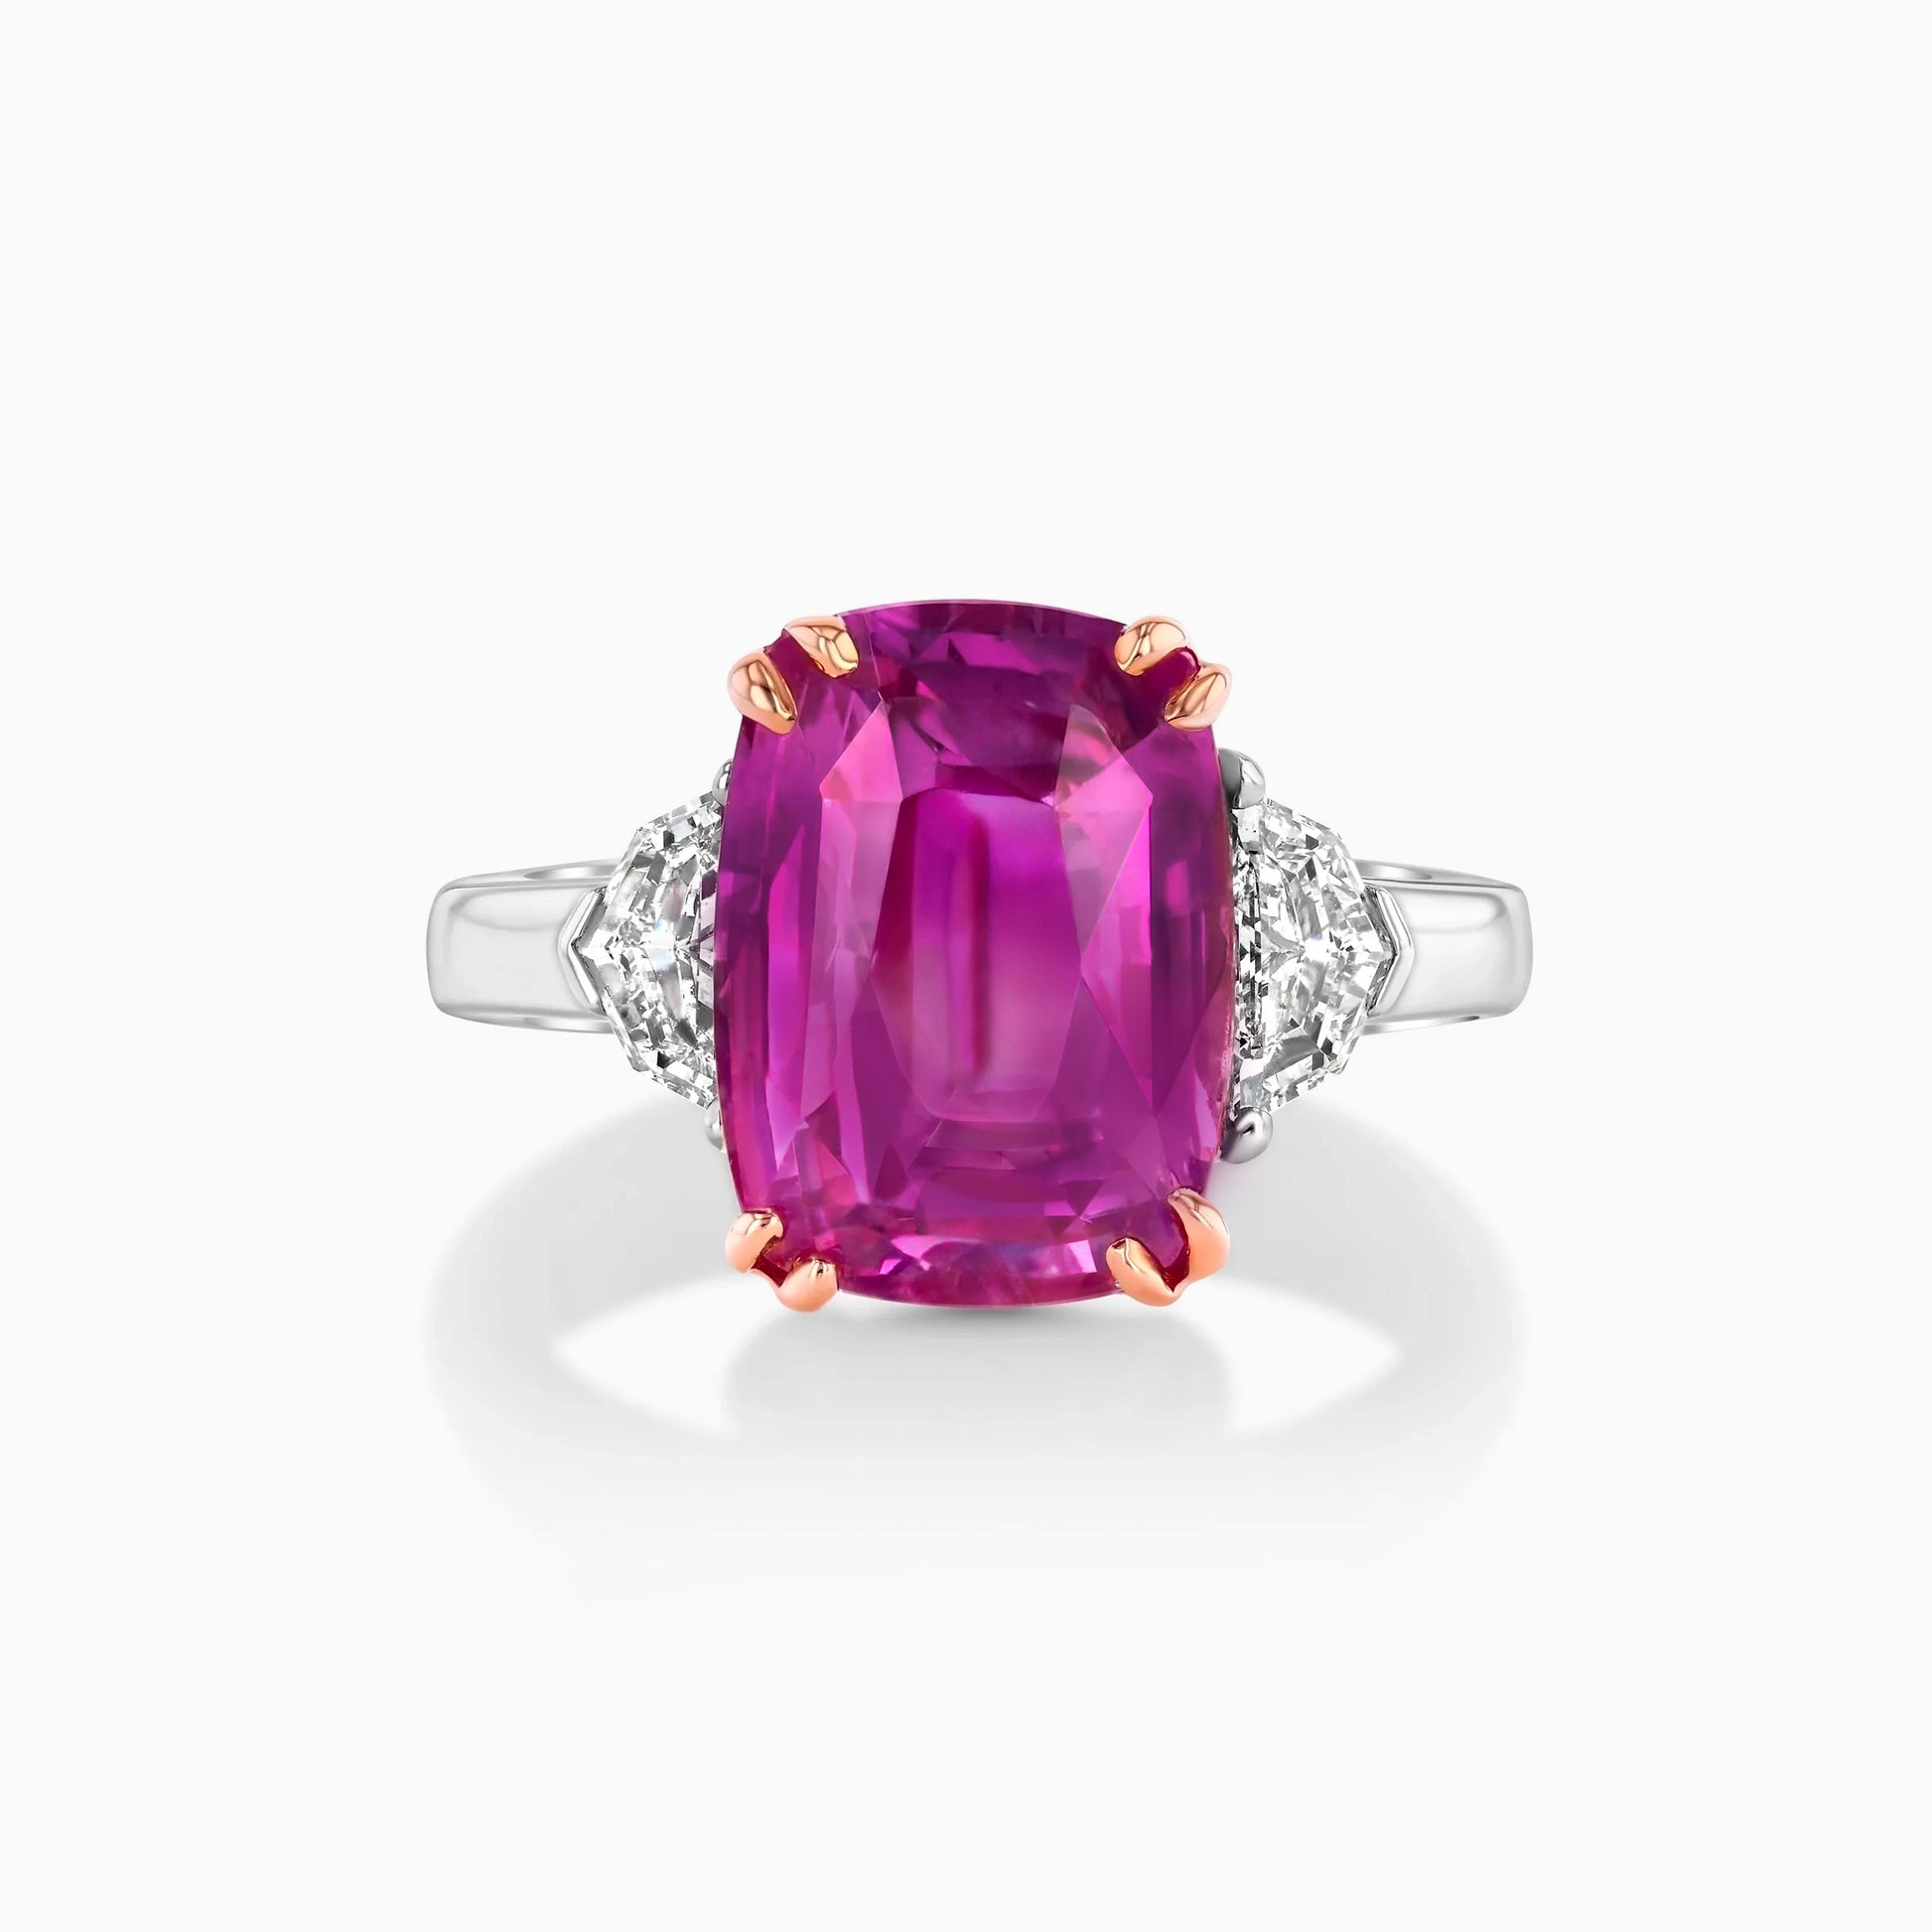 Raspberry Pink Sapphire and Diamonds Platinum Ring on a white background